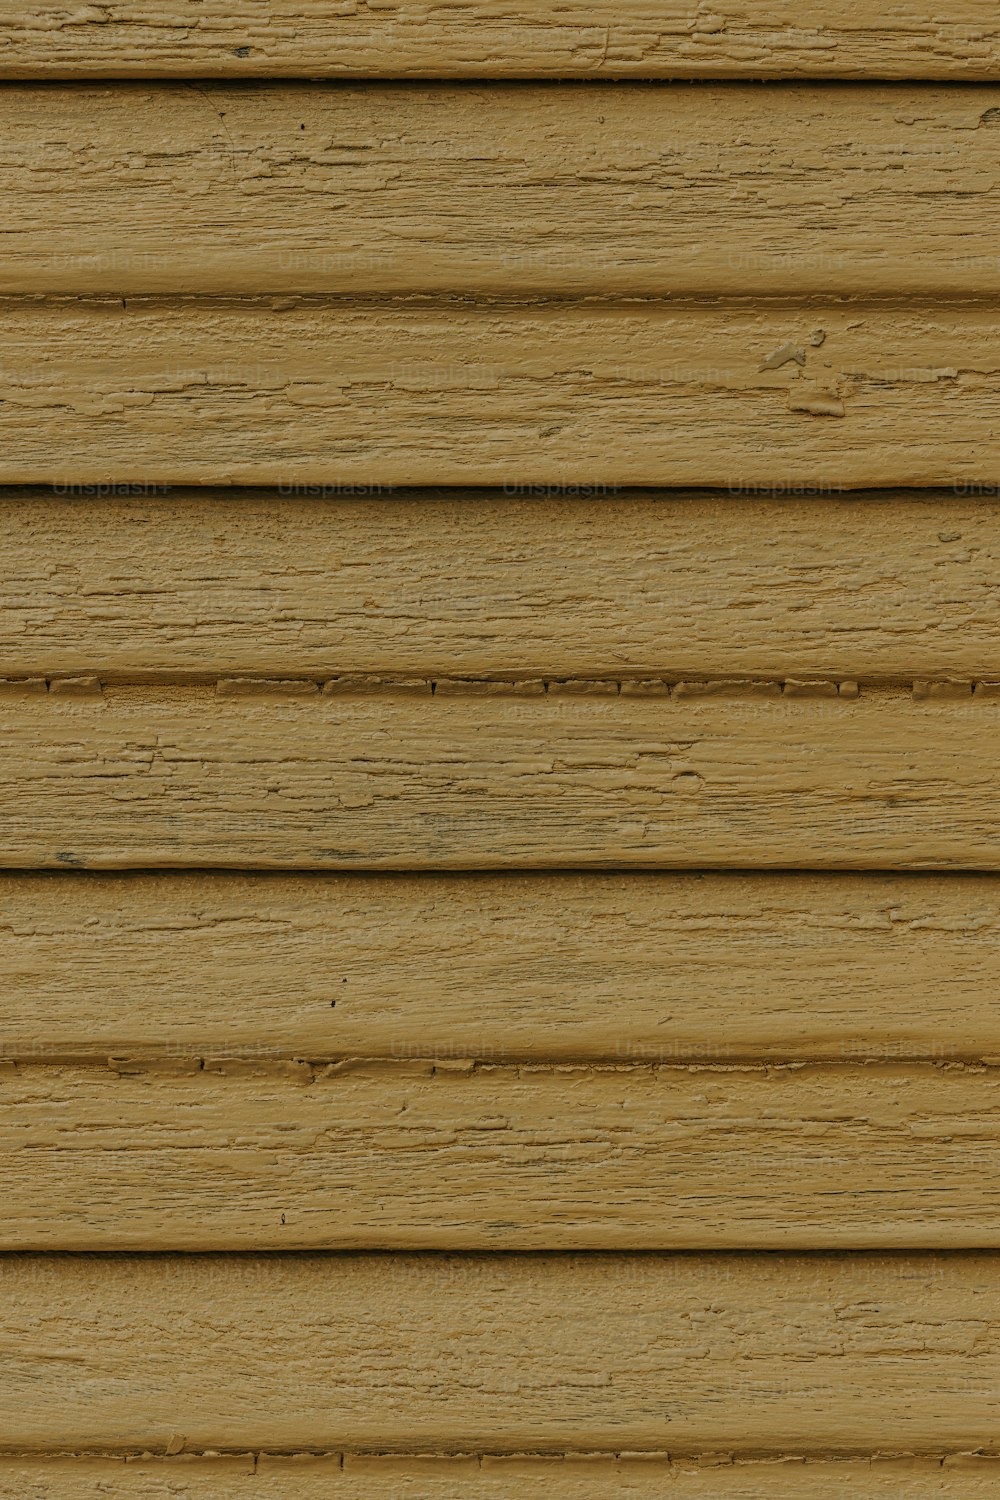 a close up view of a wooden siding